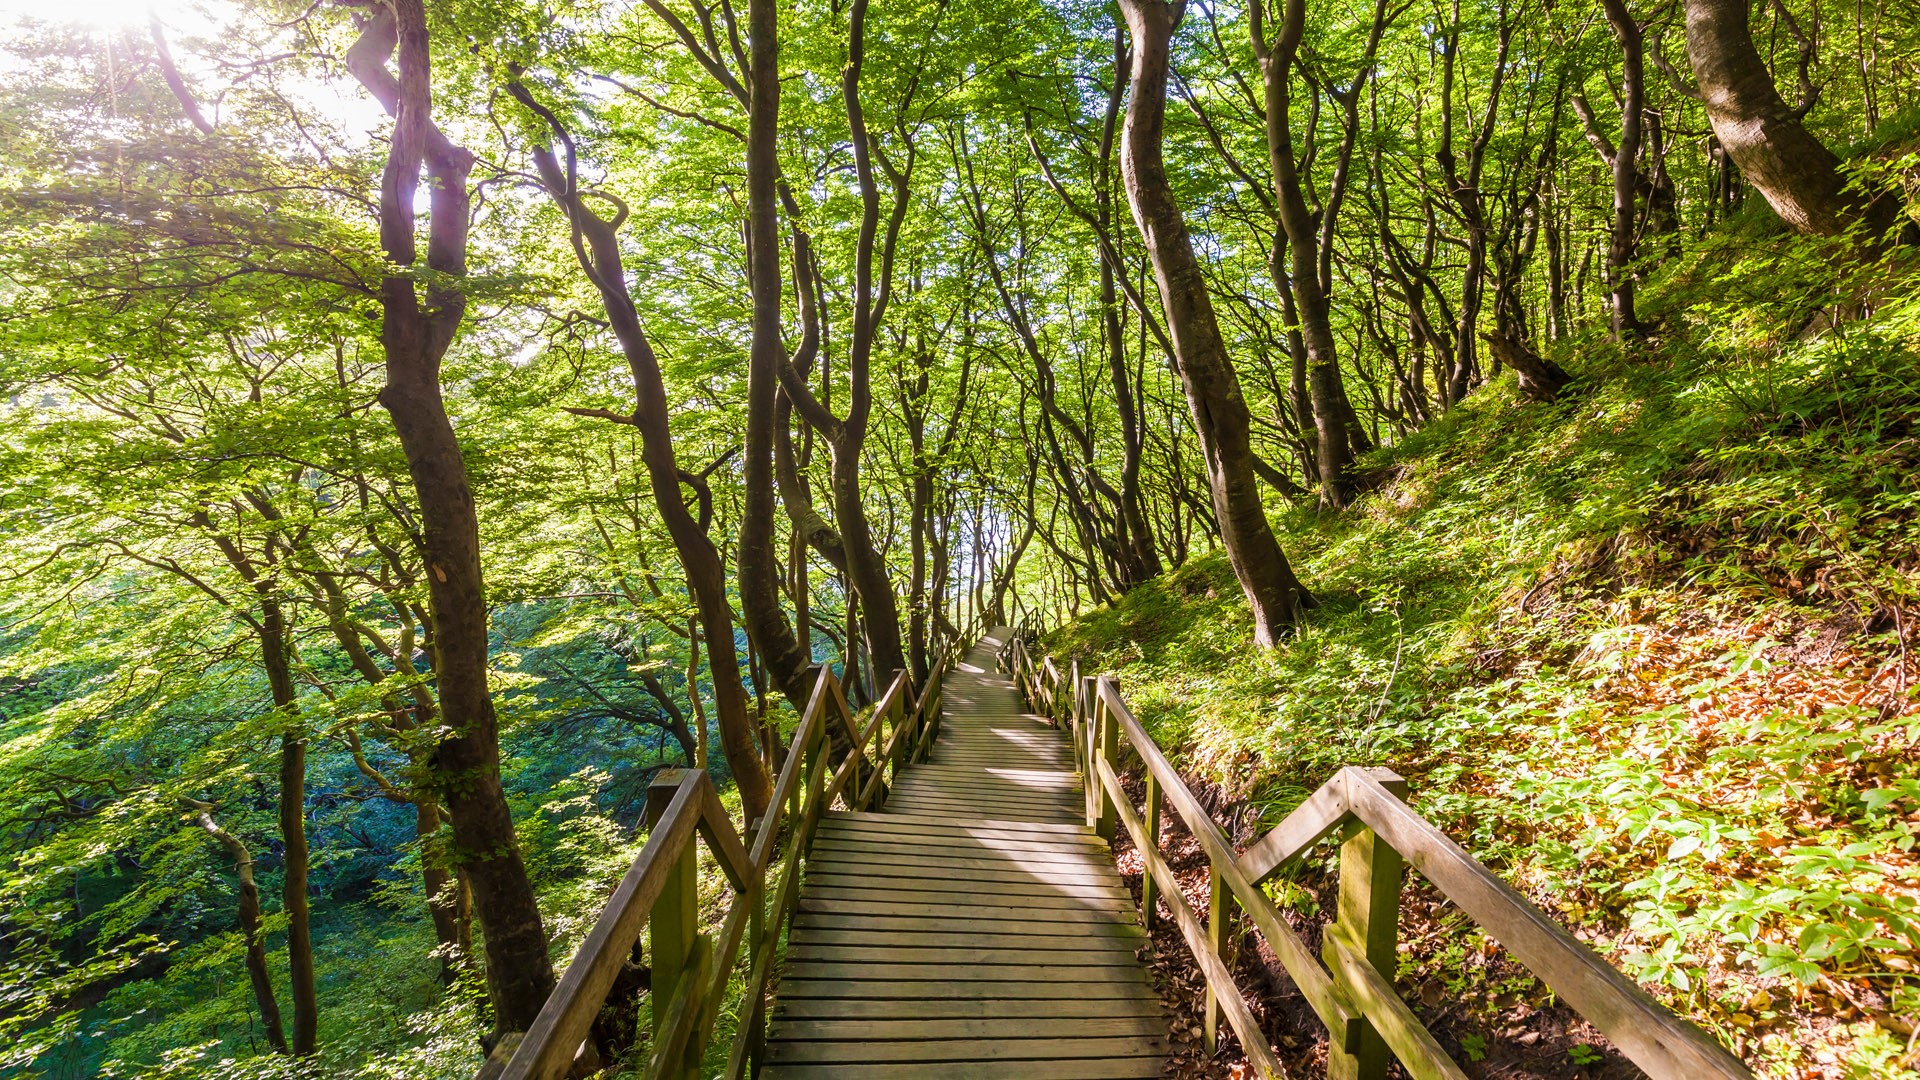 Nature Landscape Trees Forest Plants Leaves Sun Rays Tropical Wooden Walkway Walkway Denmark 1920x1080